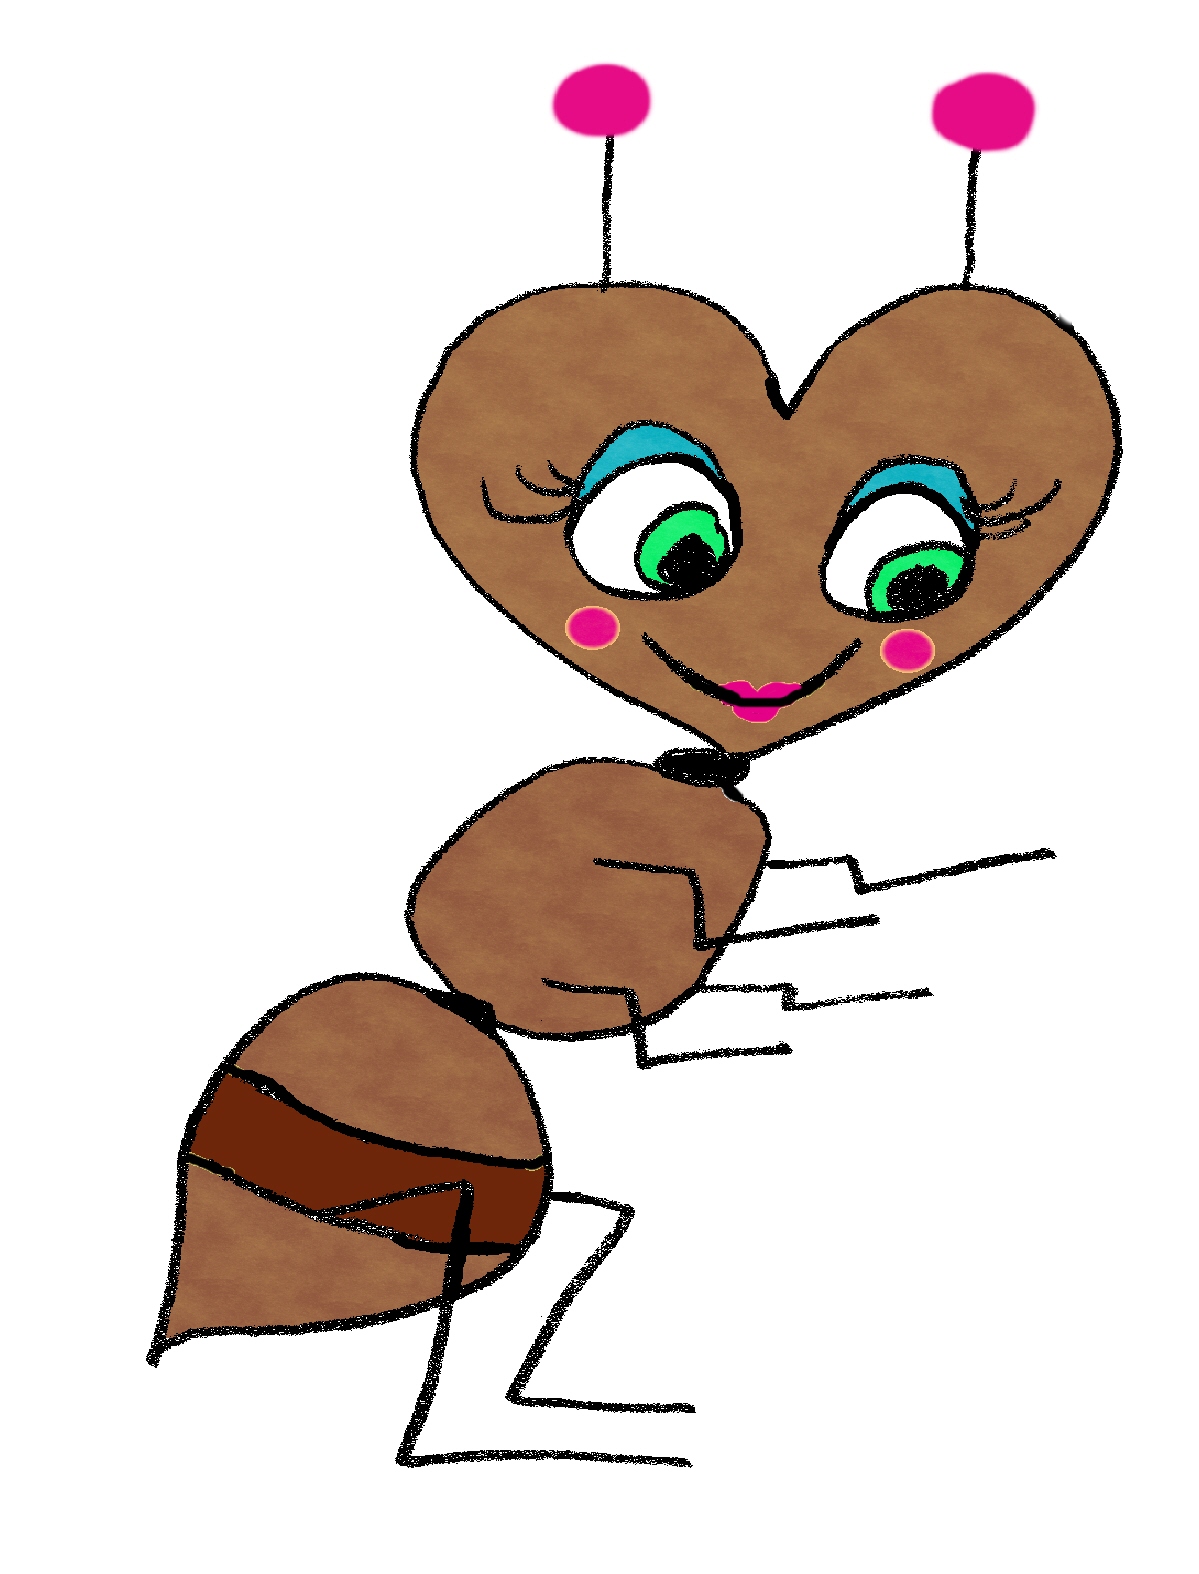 Ant Images Hd Image Clipart